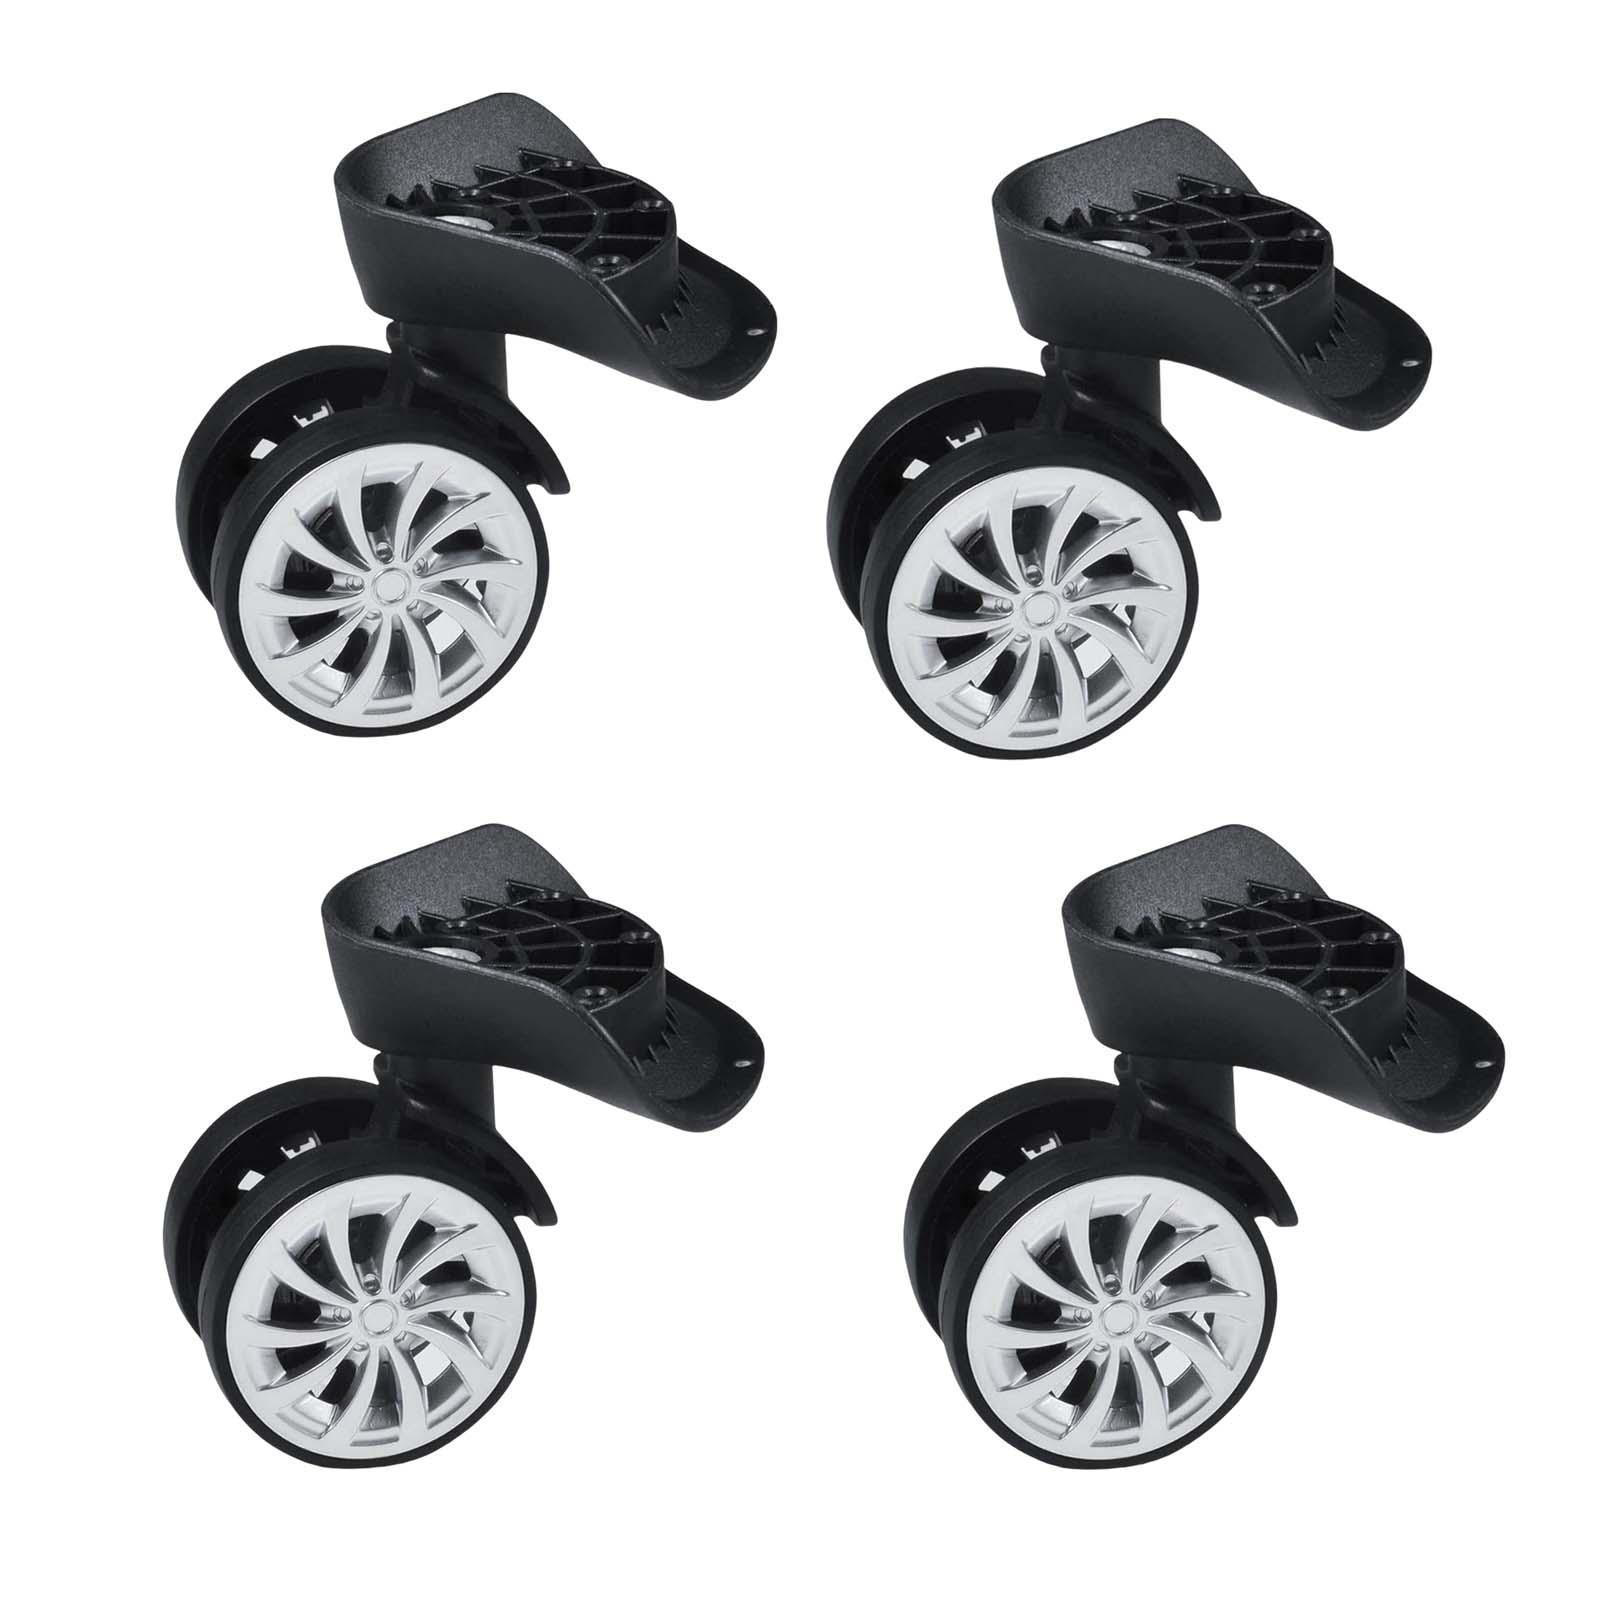 4x Luggage Suitcase Wheel Replacement Universal for Suitcase